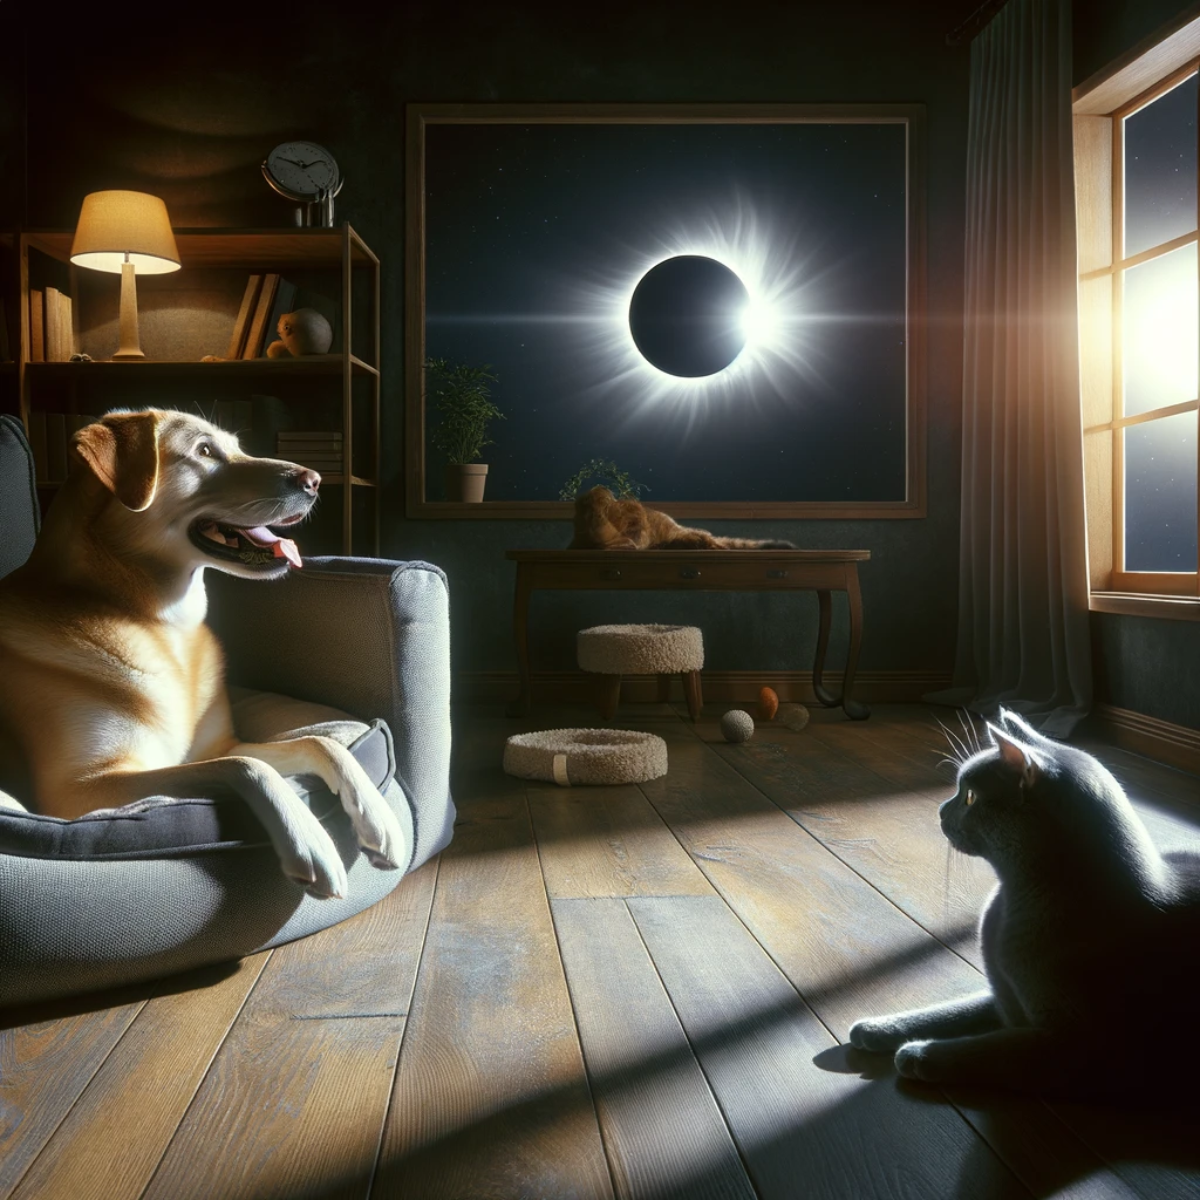 A content dog and an inquisitive cat indoors, observing a solar eclipse from a cozy room, highlighting pet safety during astronomical events.